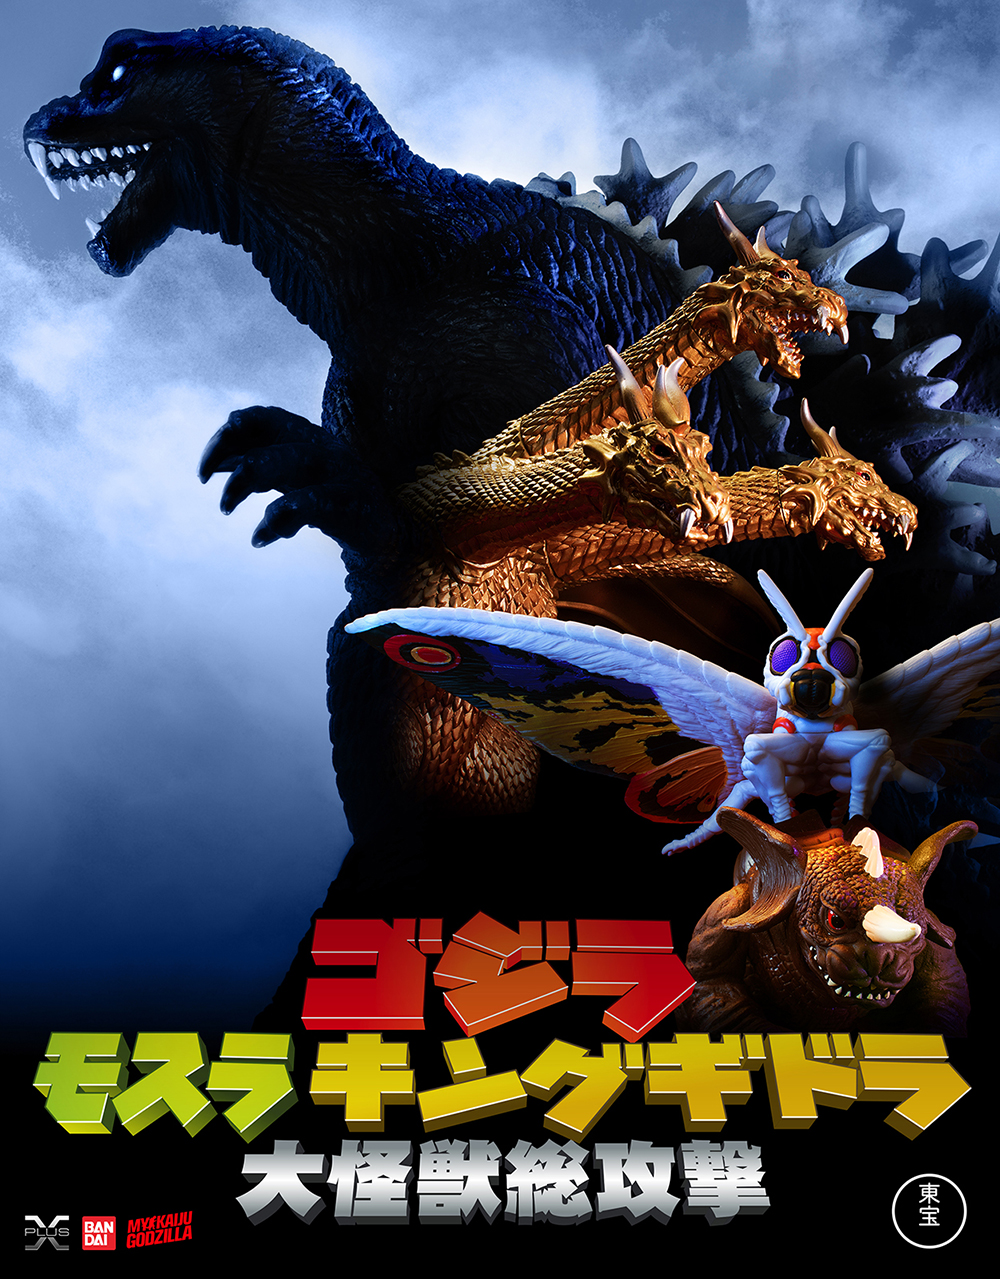 GMK Recreated Theatrical Poster